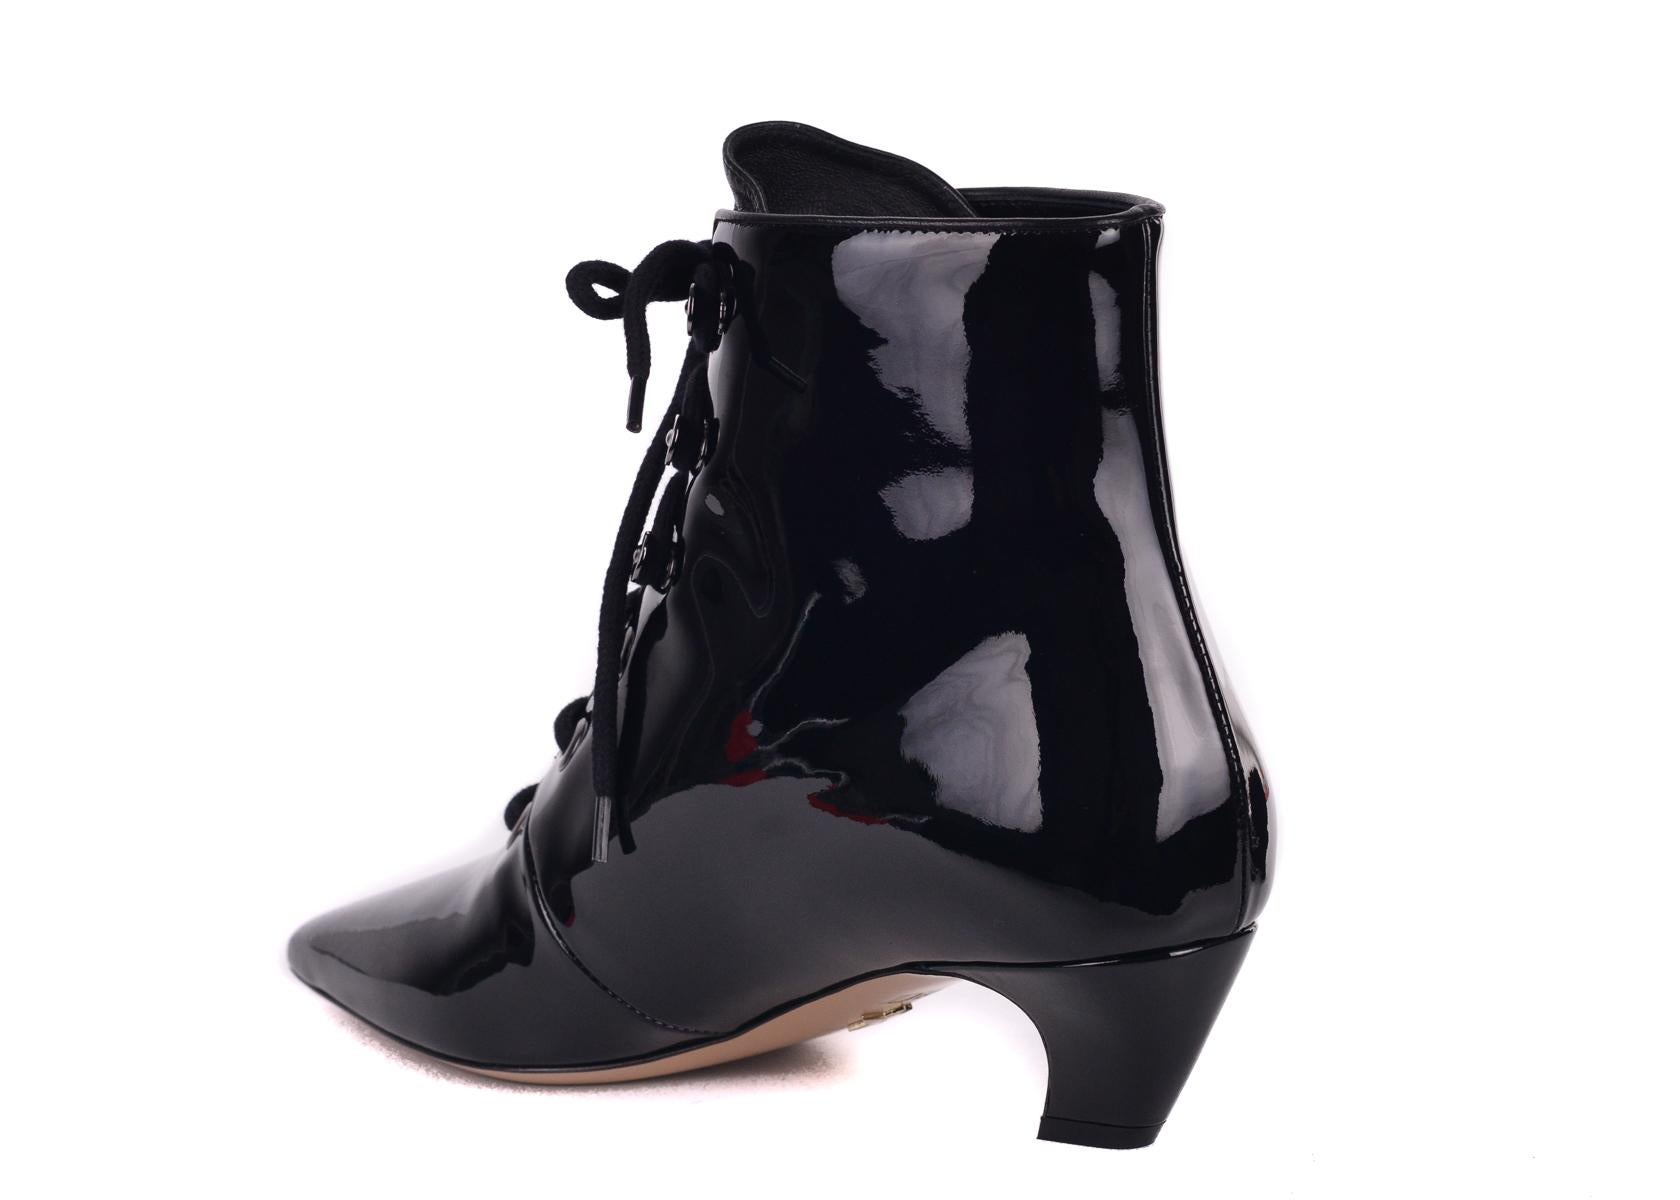 Dior Women's I-Dior Black Patent Leather Lace Up Boots In New Condition For Sale In Brooklyn, NY